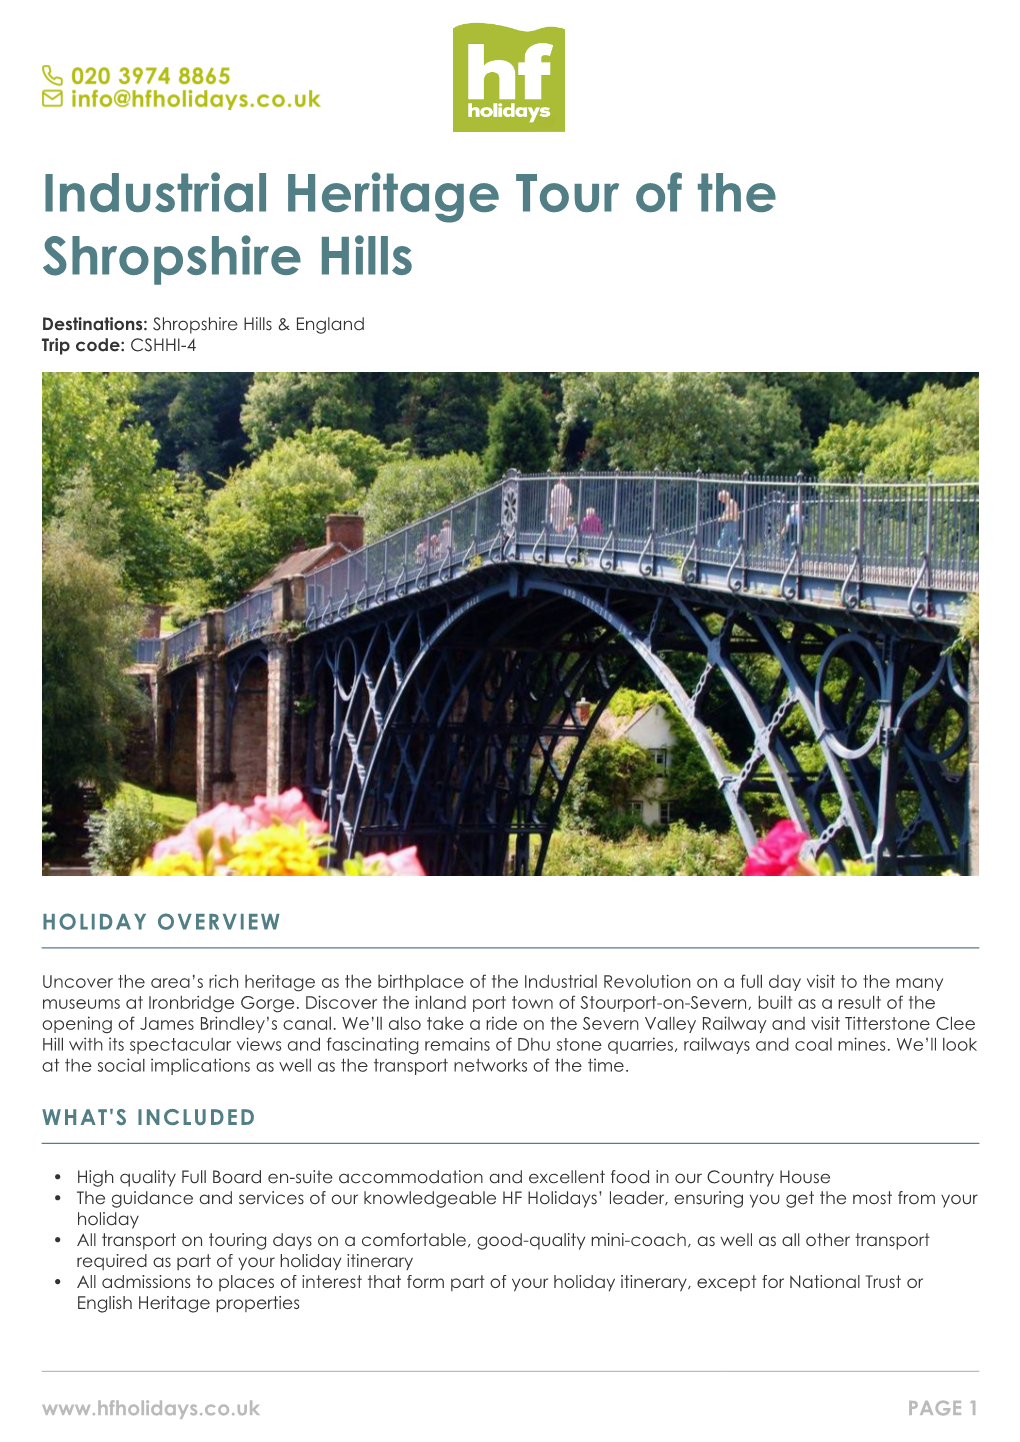 Industrial Heritage Tour of the Shropshire Hills